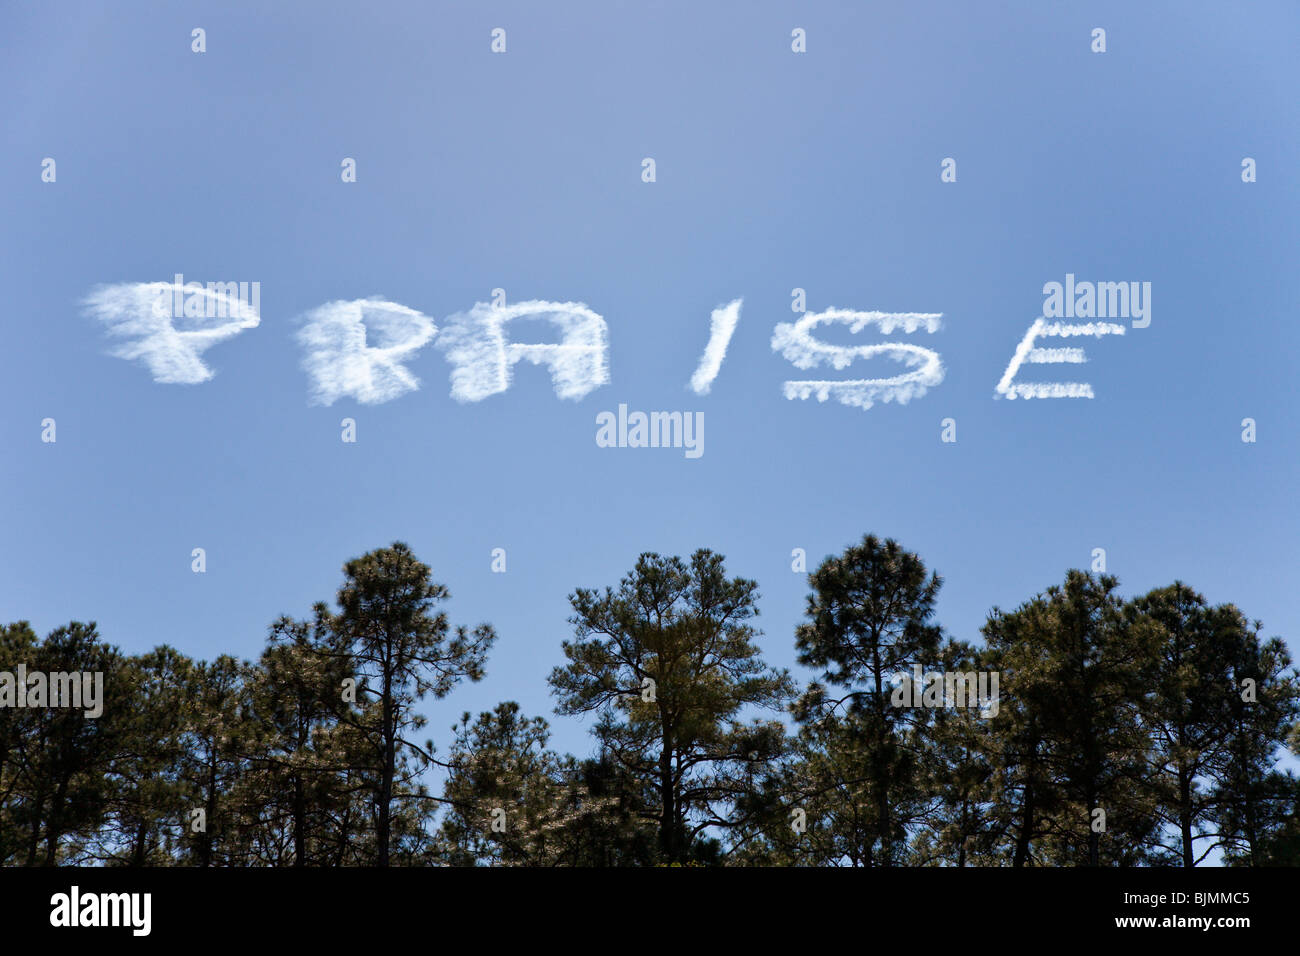 Central Florida - Jan 2009 - The word 'Praise' in skywriting over Central Florida. Stock Photo